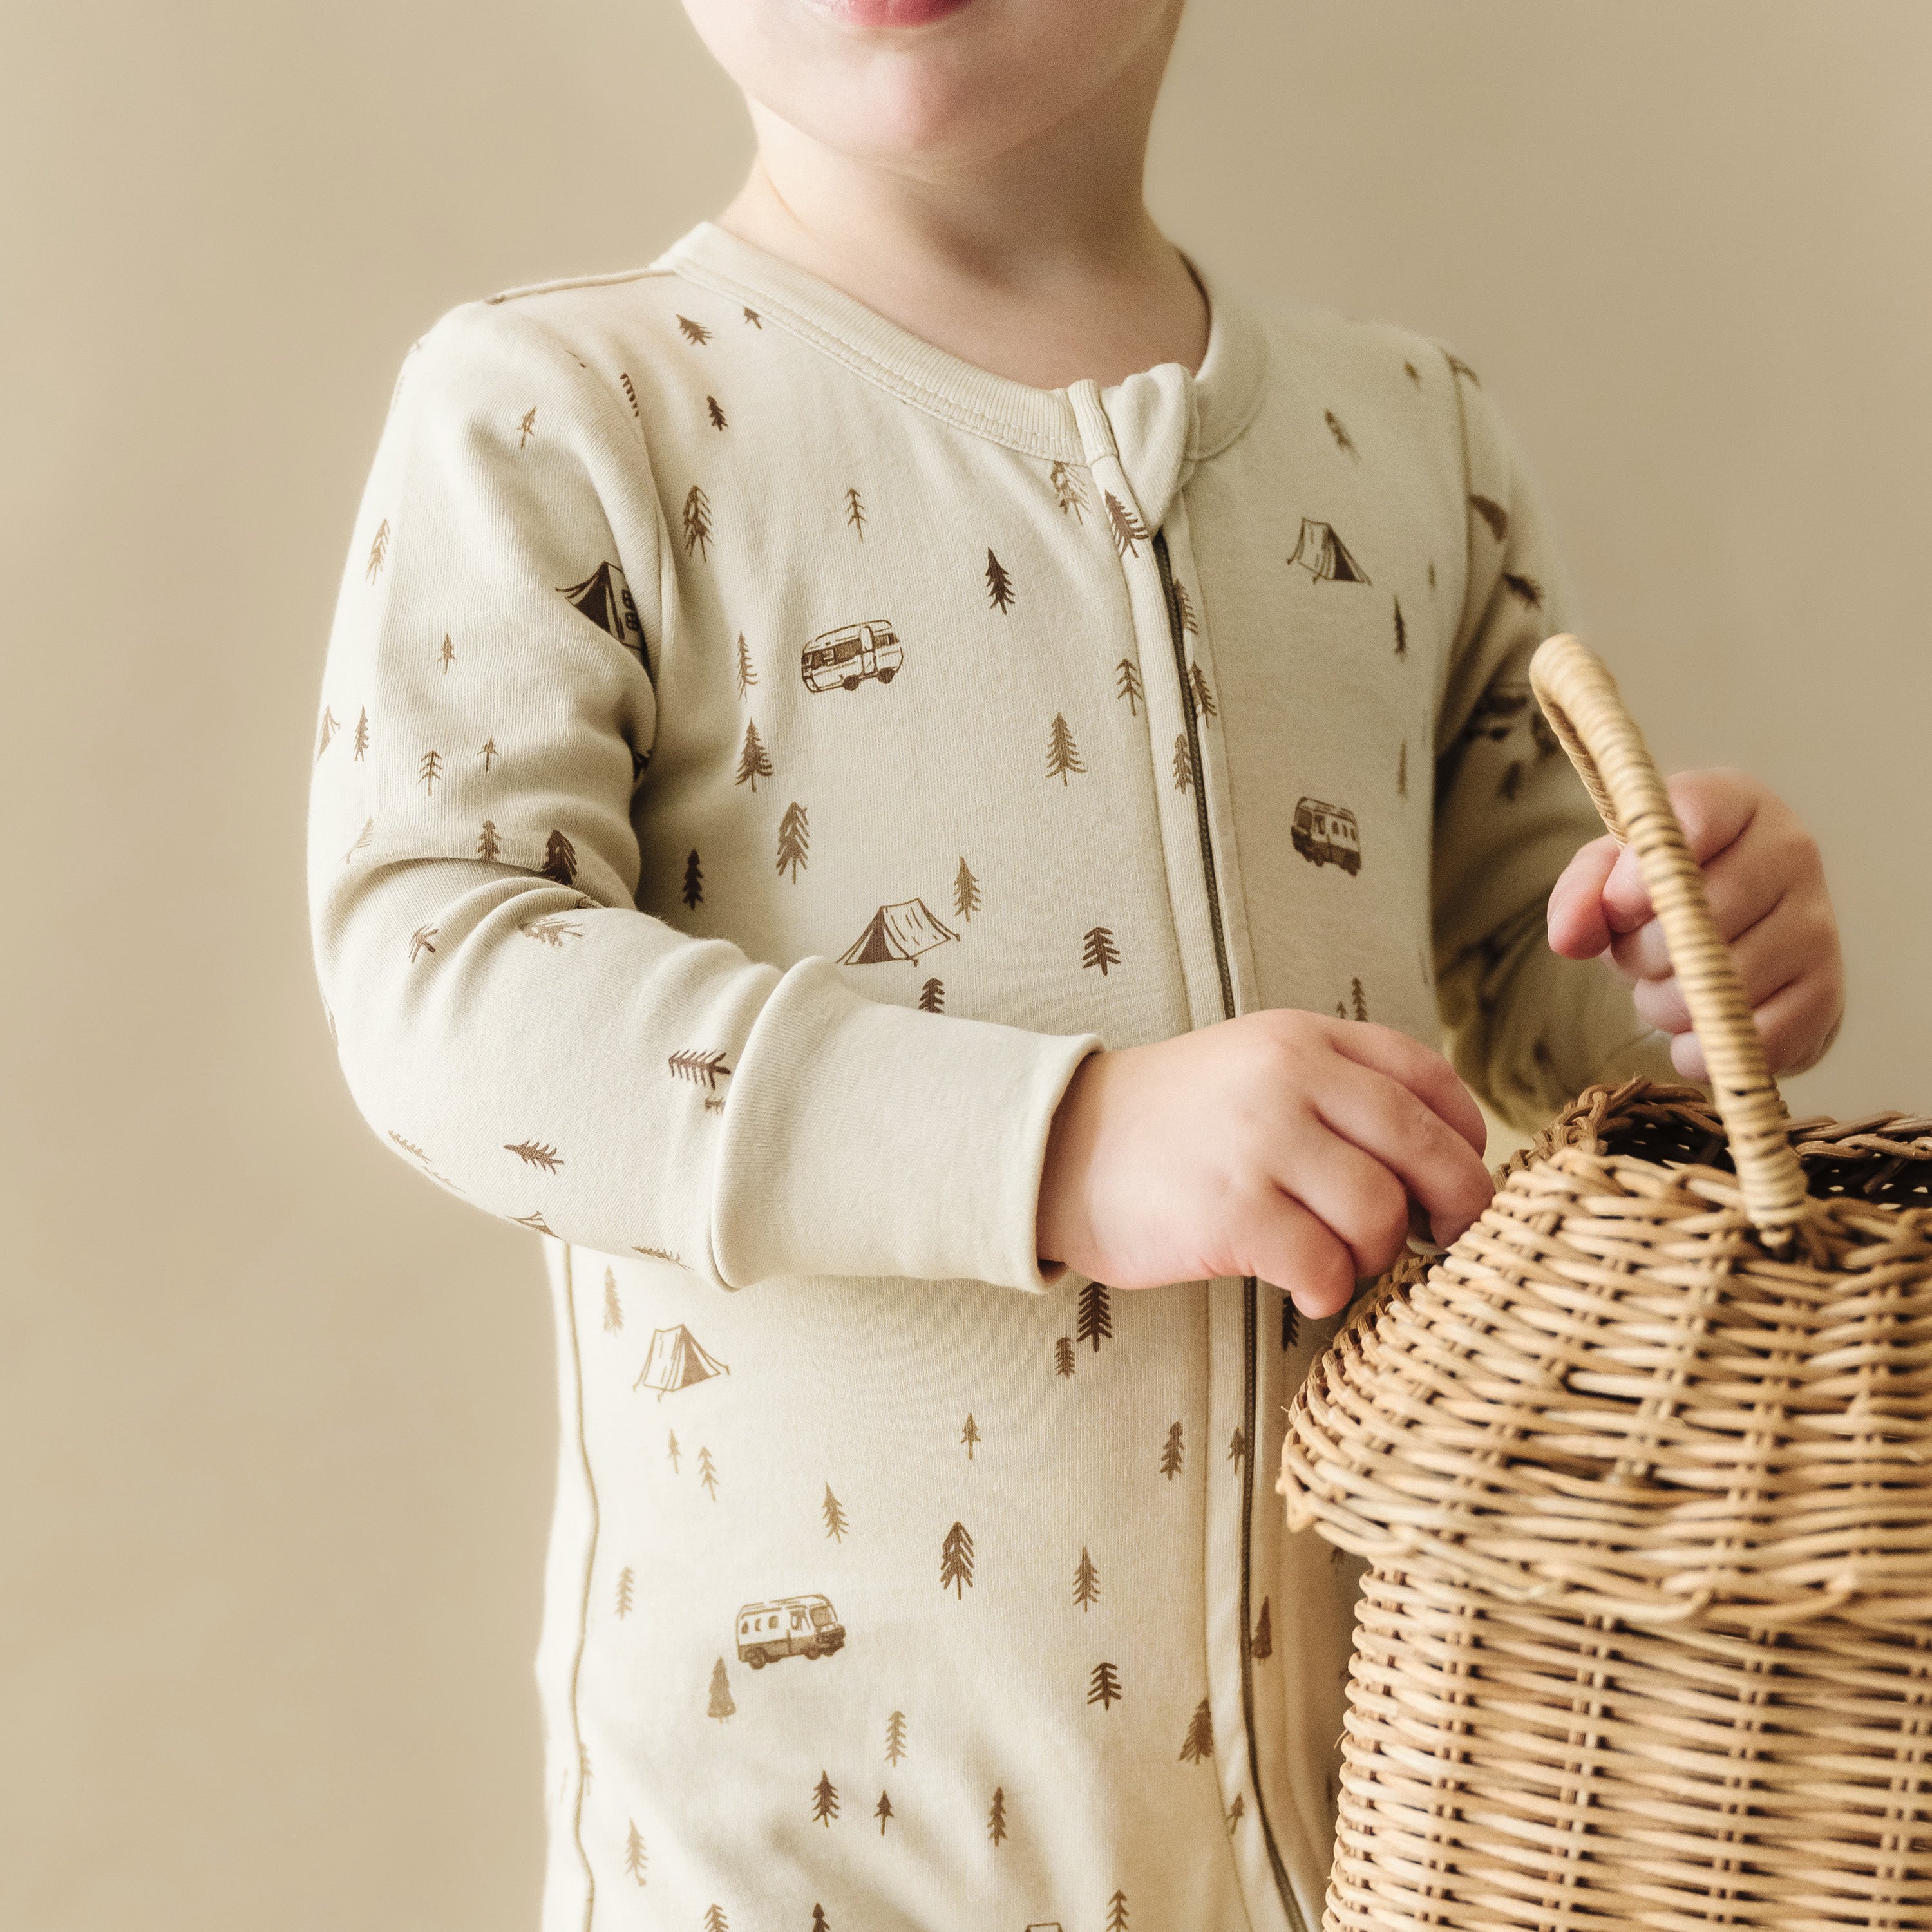 A young child in an Organic Baby Organic 2-Way Zip Romper - Camplife printed with small trees and campers holds a wicker basket, visible from the waist up against a neutral background.